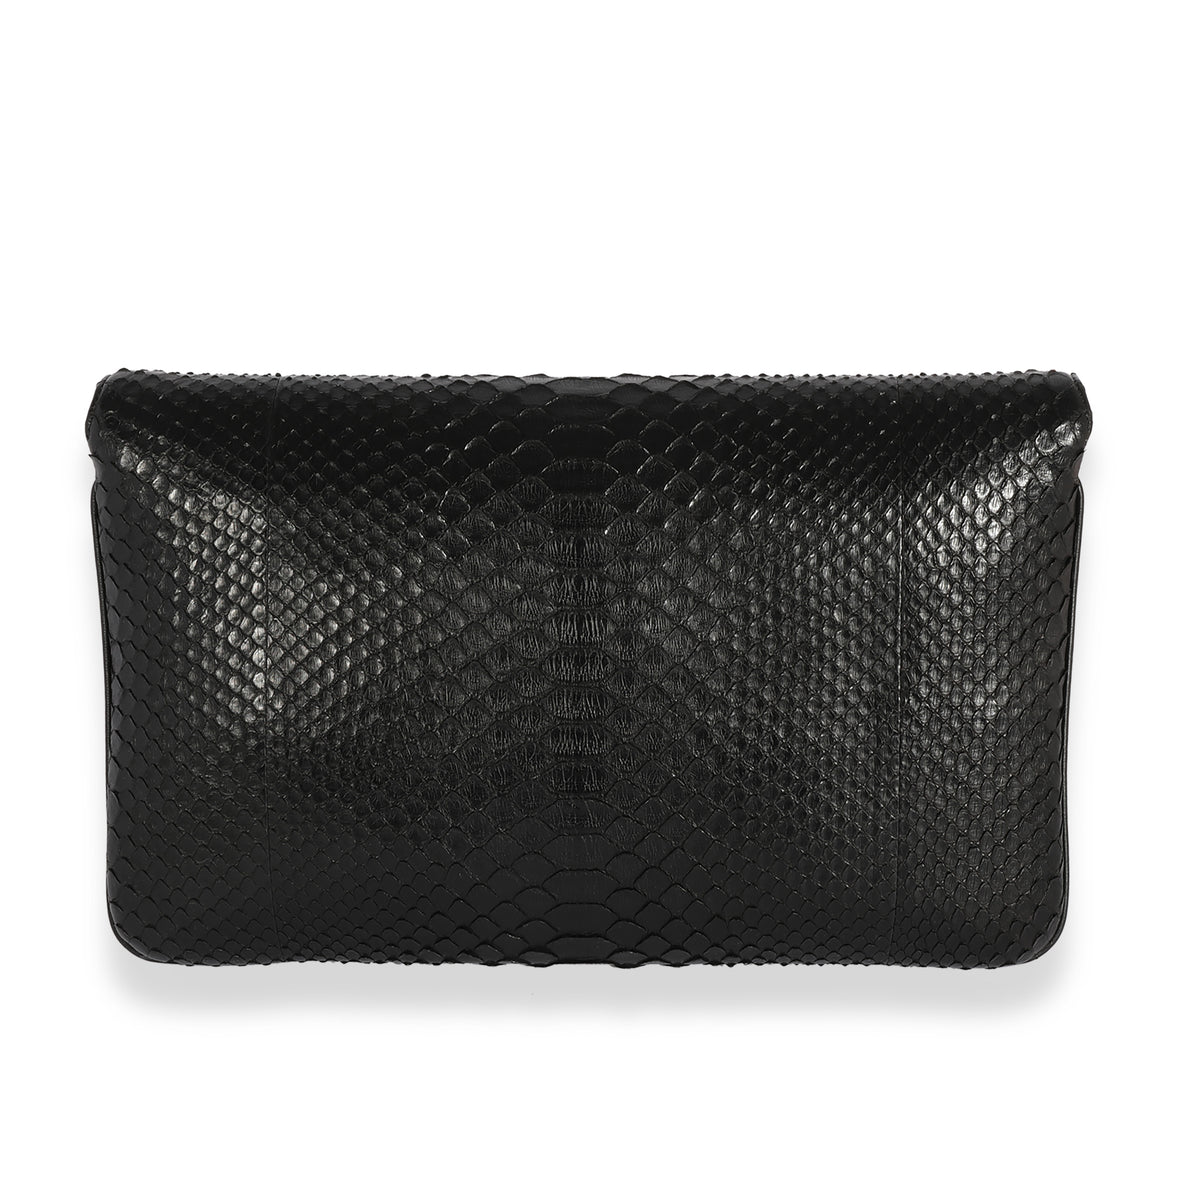 Chanel Black Python Unchained Clutch